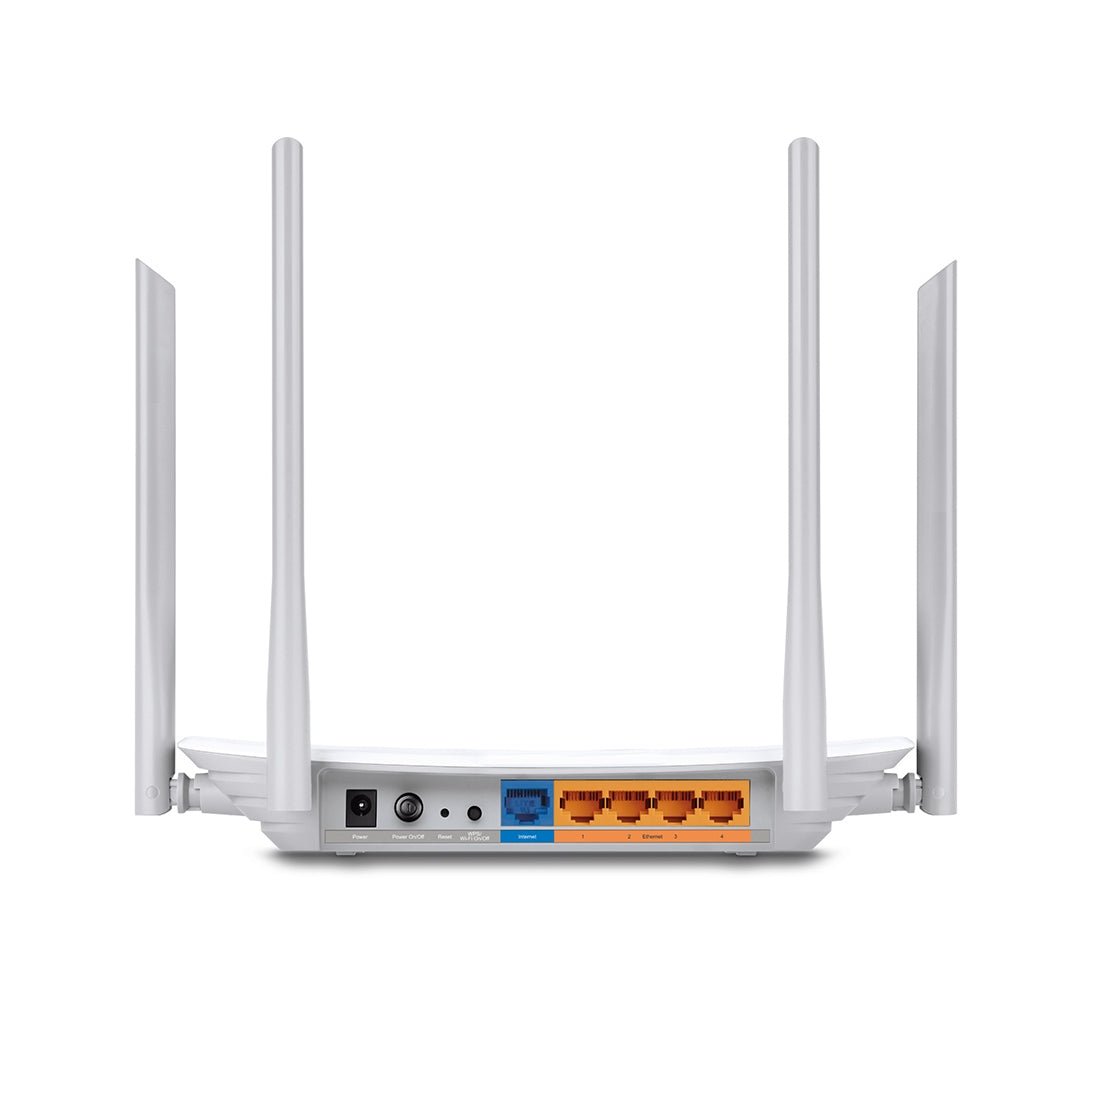 TP-Link Archer C50 Dual Band WiFi Gaming Router - راوتر لاسلكي - Store 974 | ستور ٩٧٤